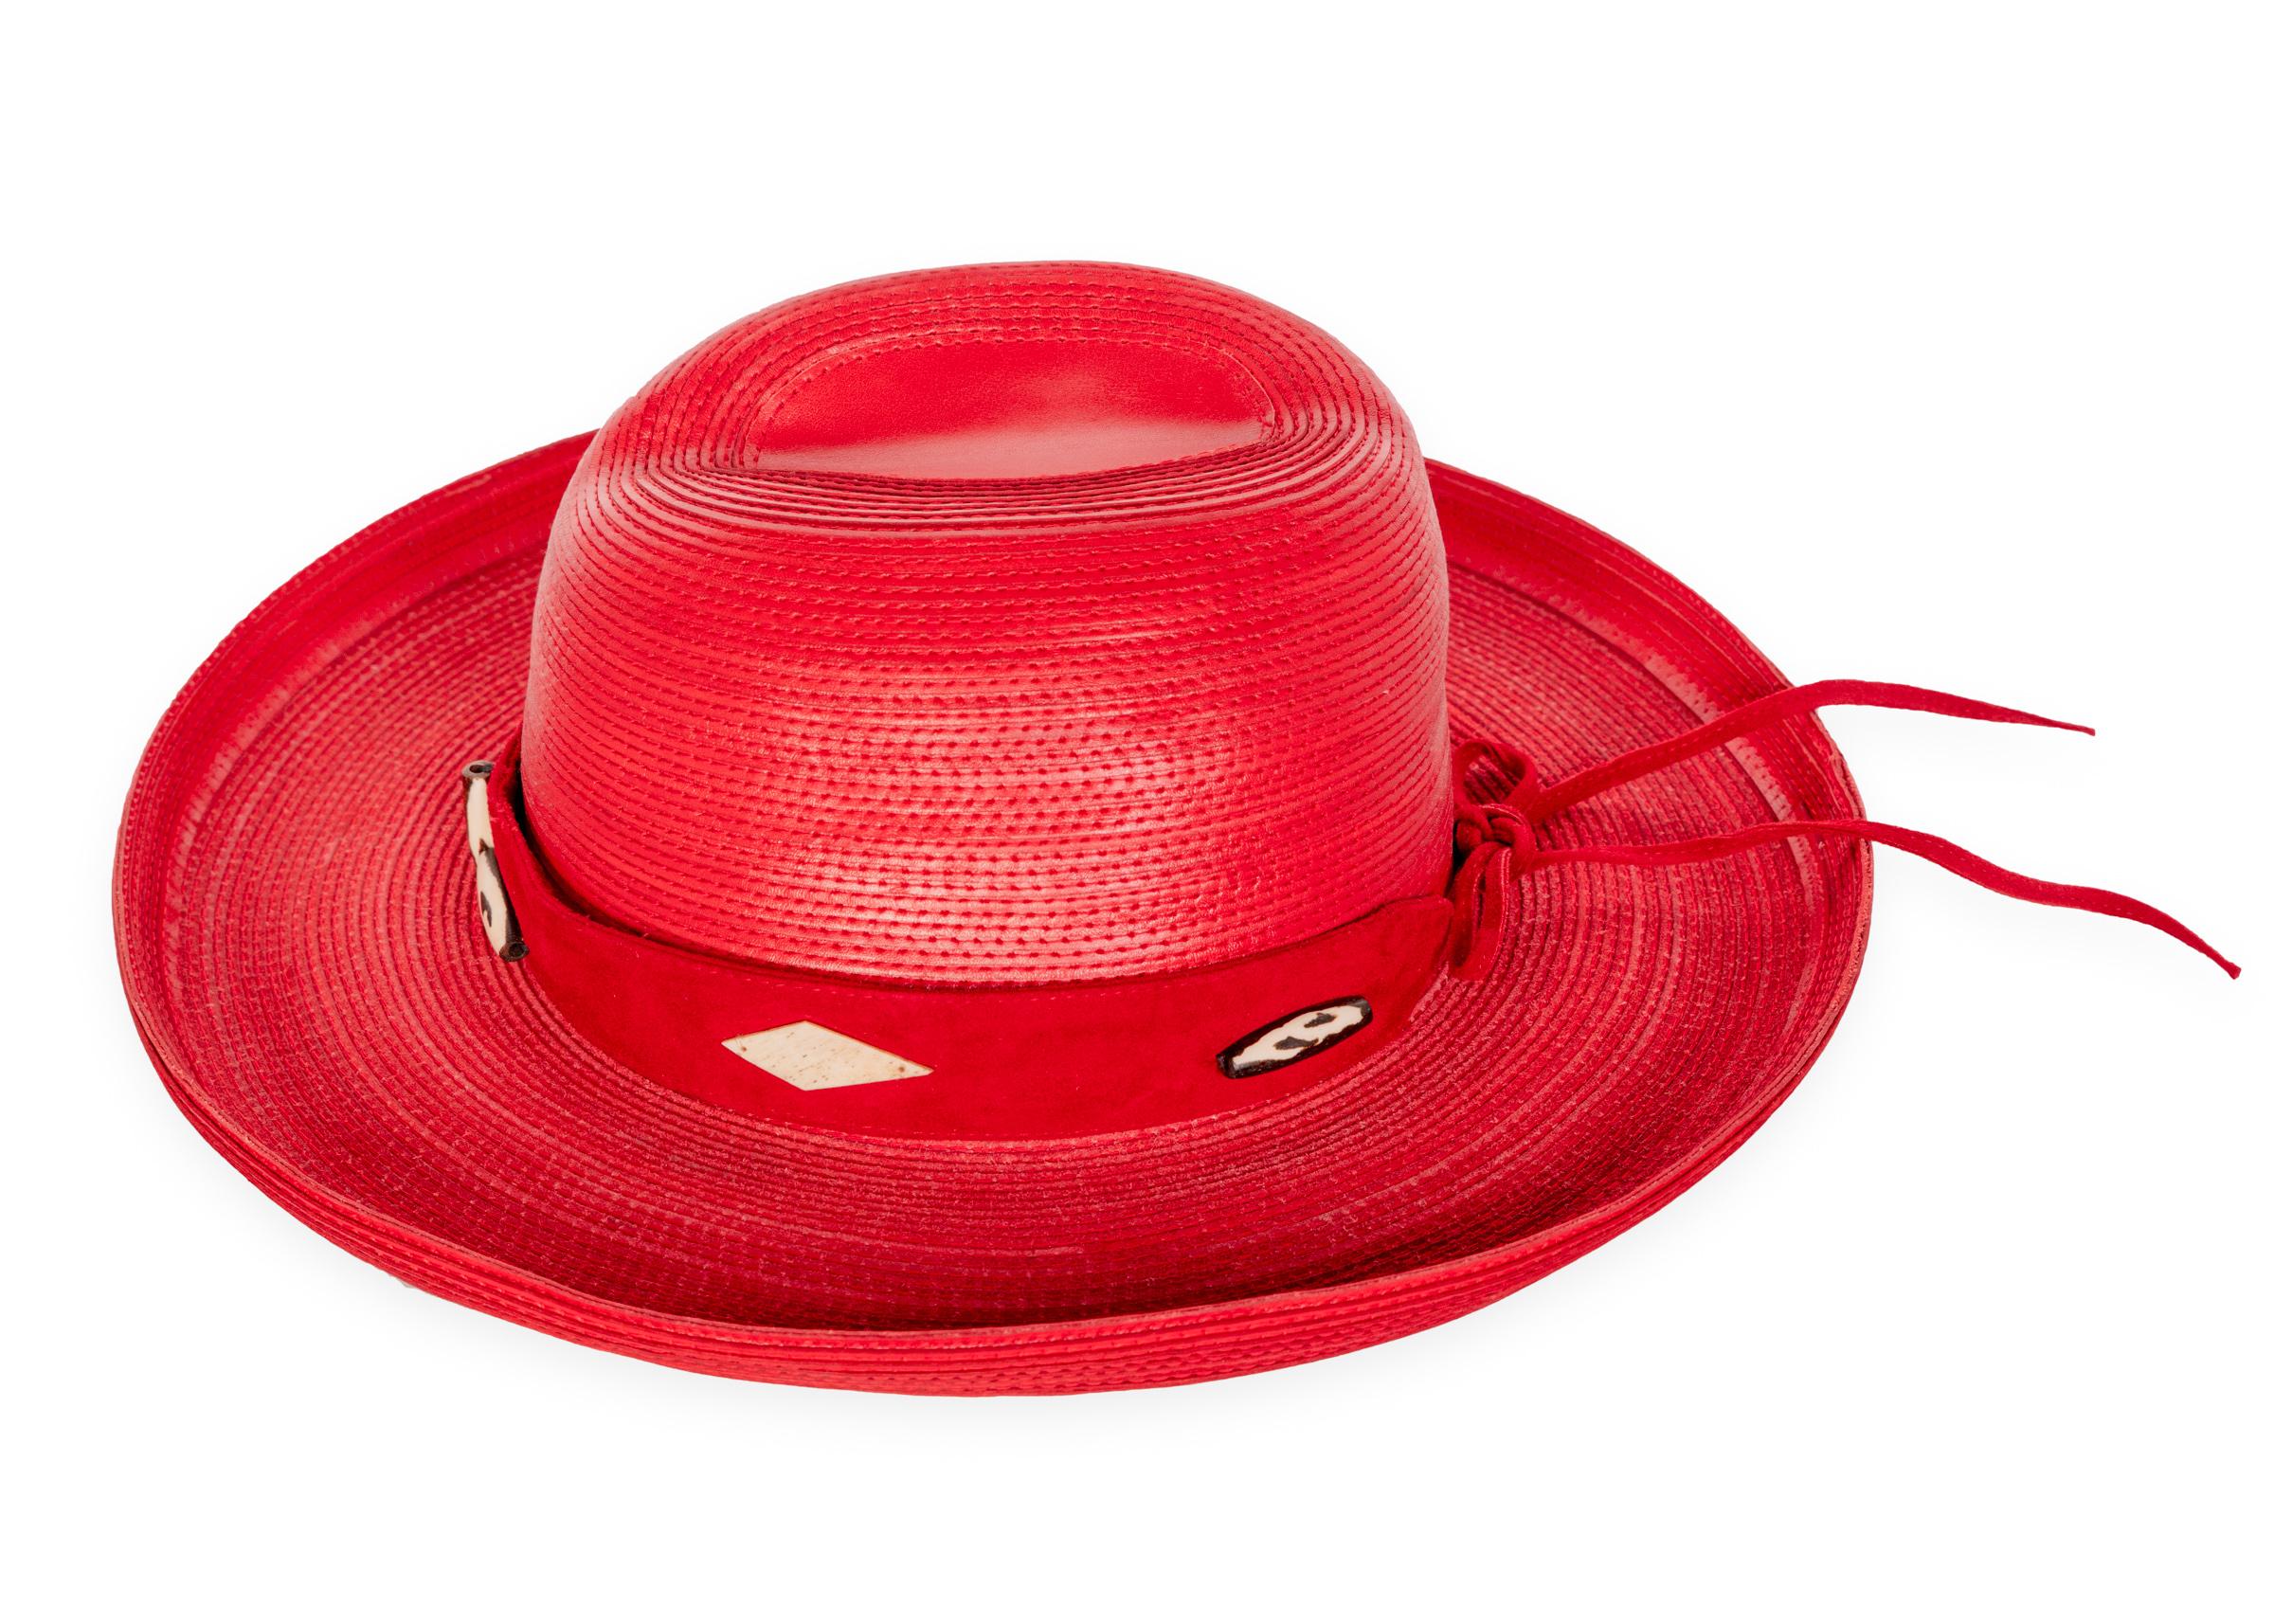 1980s Patricia Underwood red leather hat, with detachable suede hat band embellished with beads. 
Excellent condition.

Measurements:
Brim: 3.5 inches
Crown height: 4 3/4 inches
Circumference: 22 inches